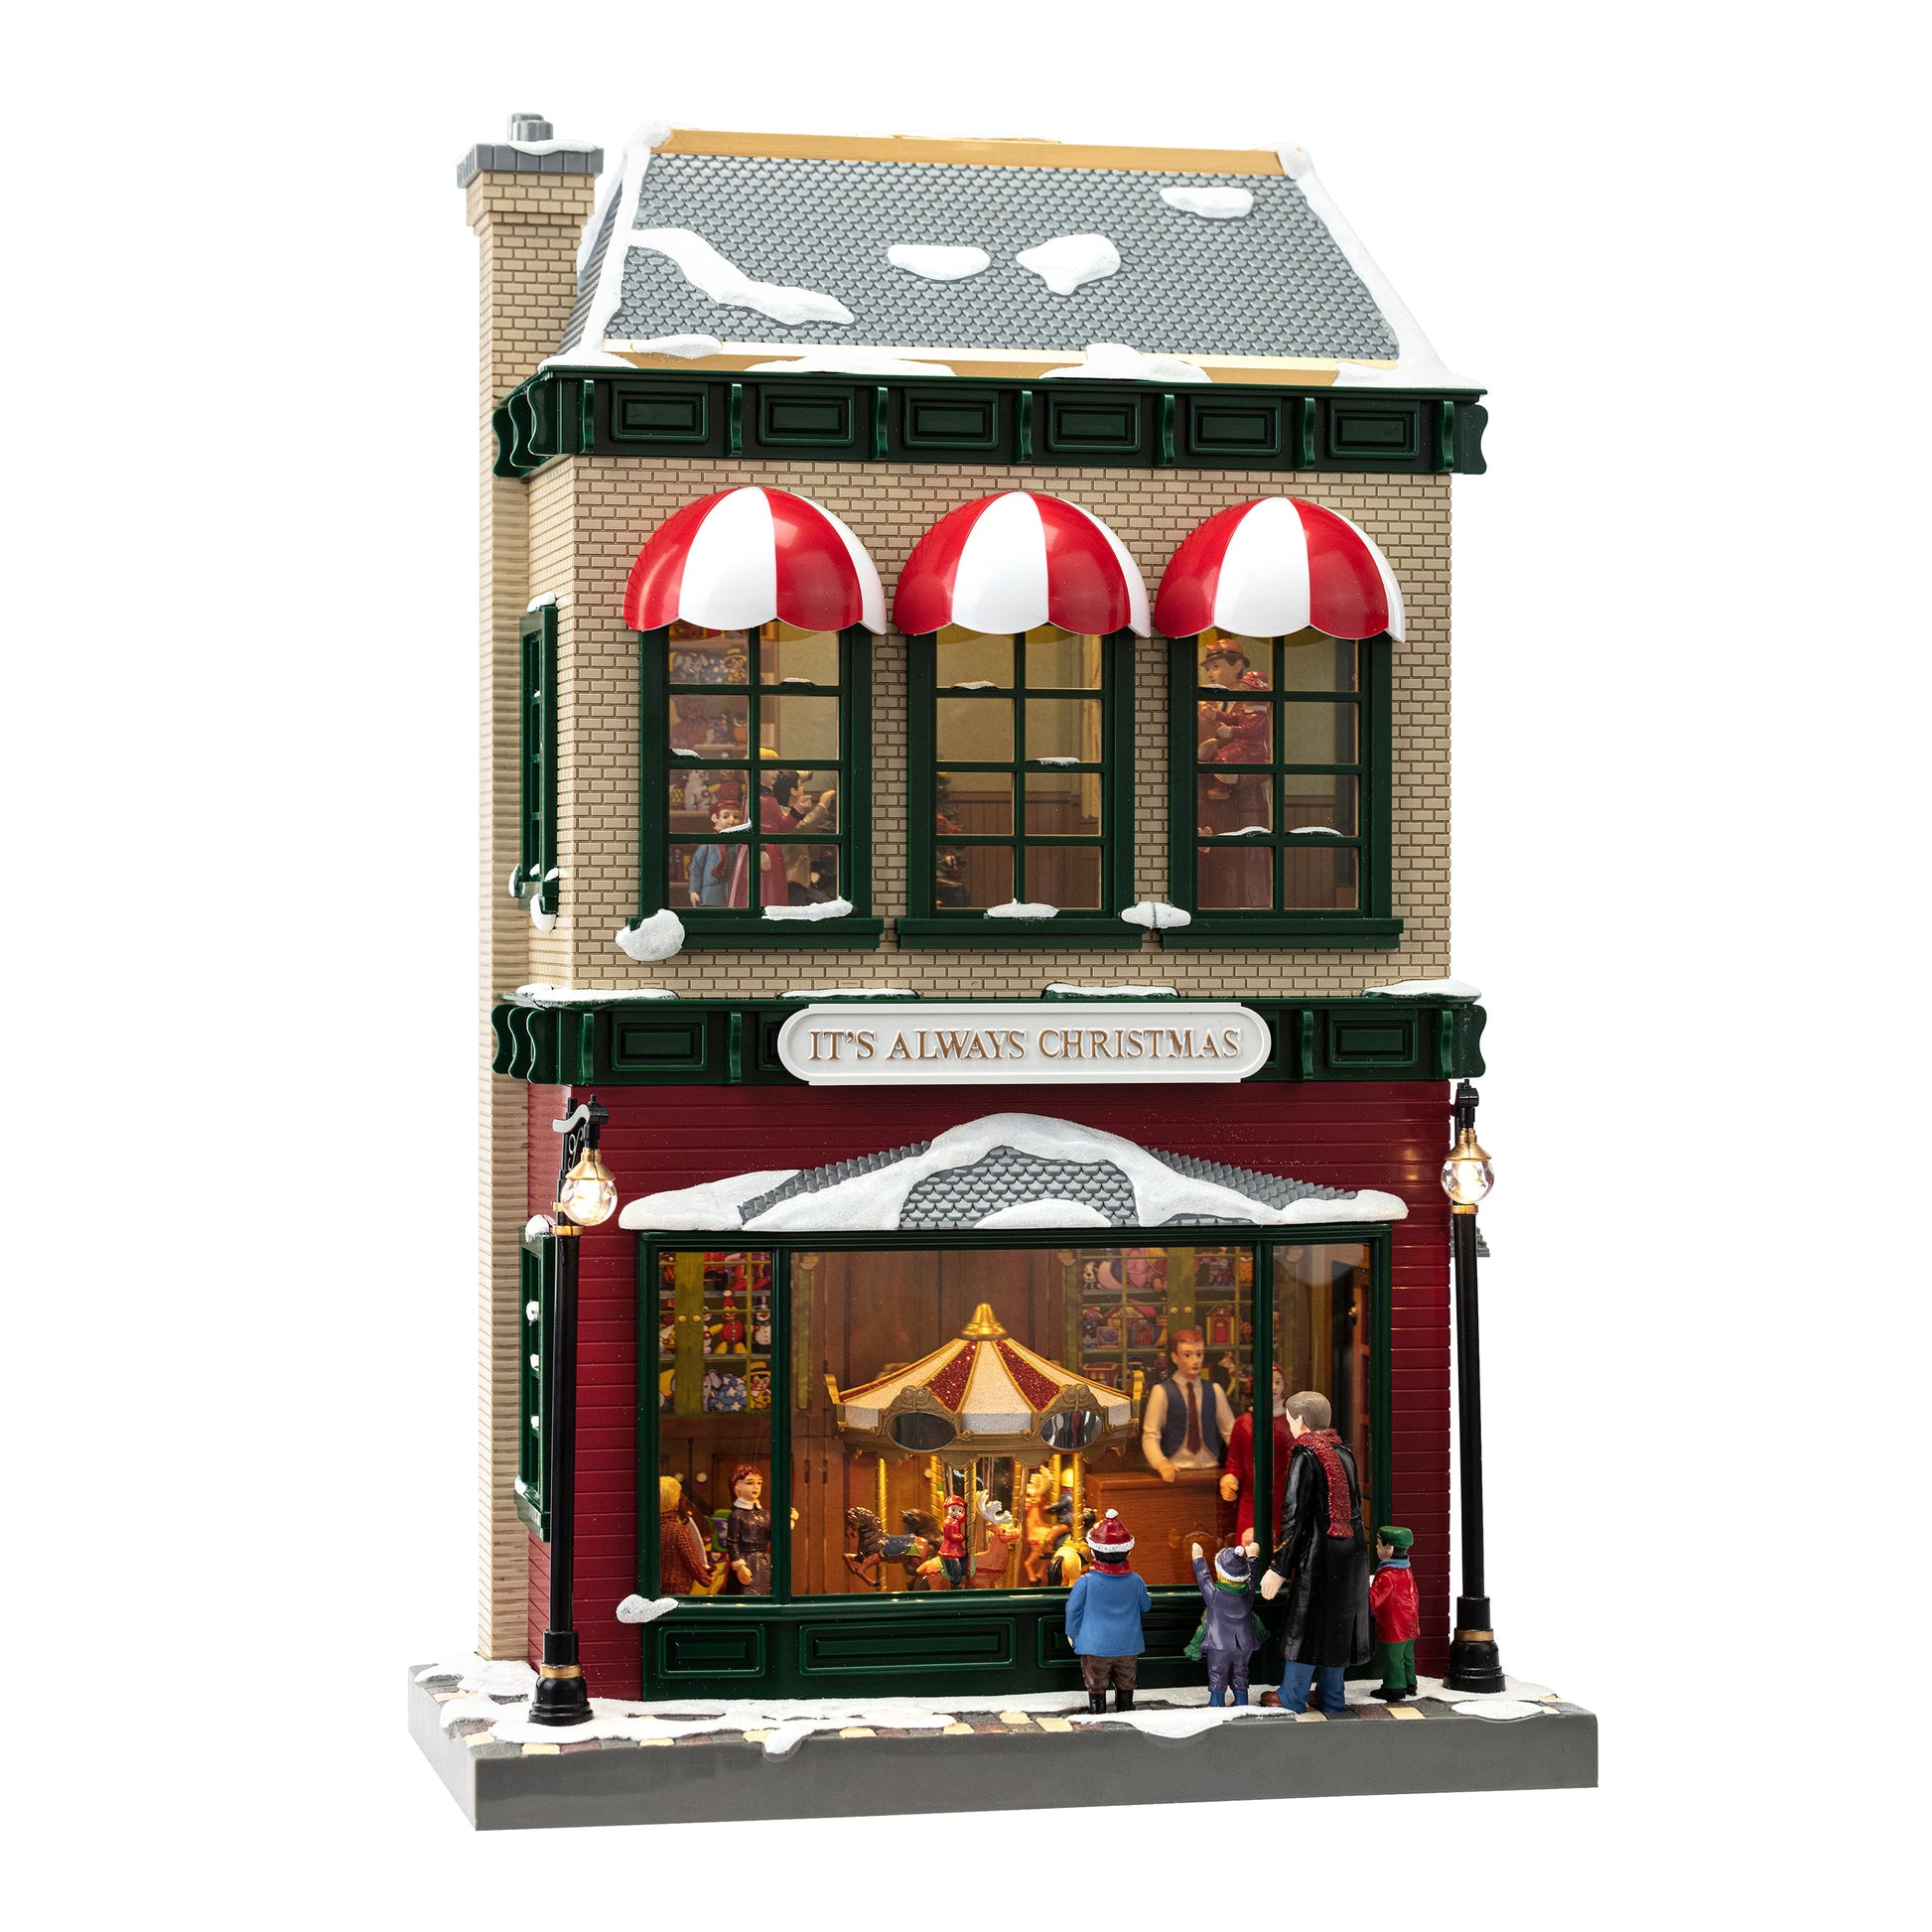 21.5" Animated & Musical Vintage Department Store - Mr. Christmas